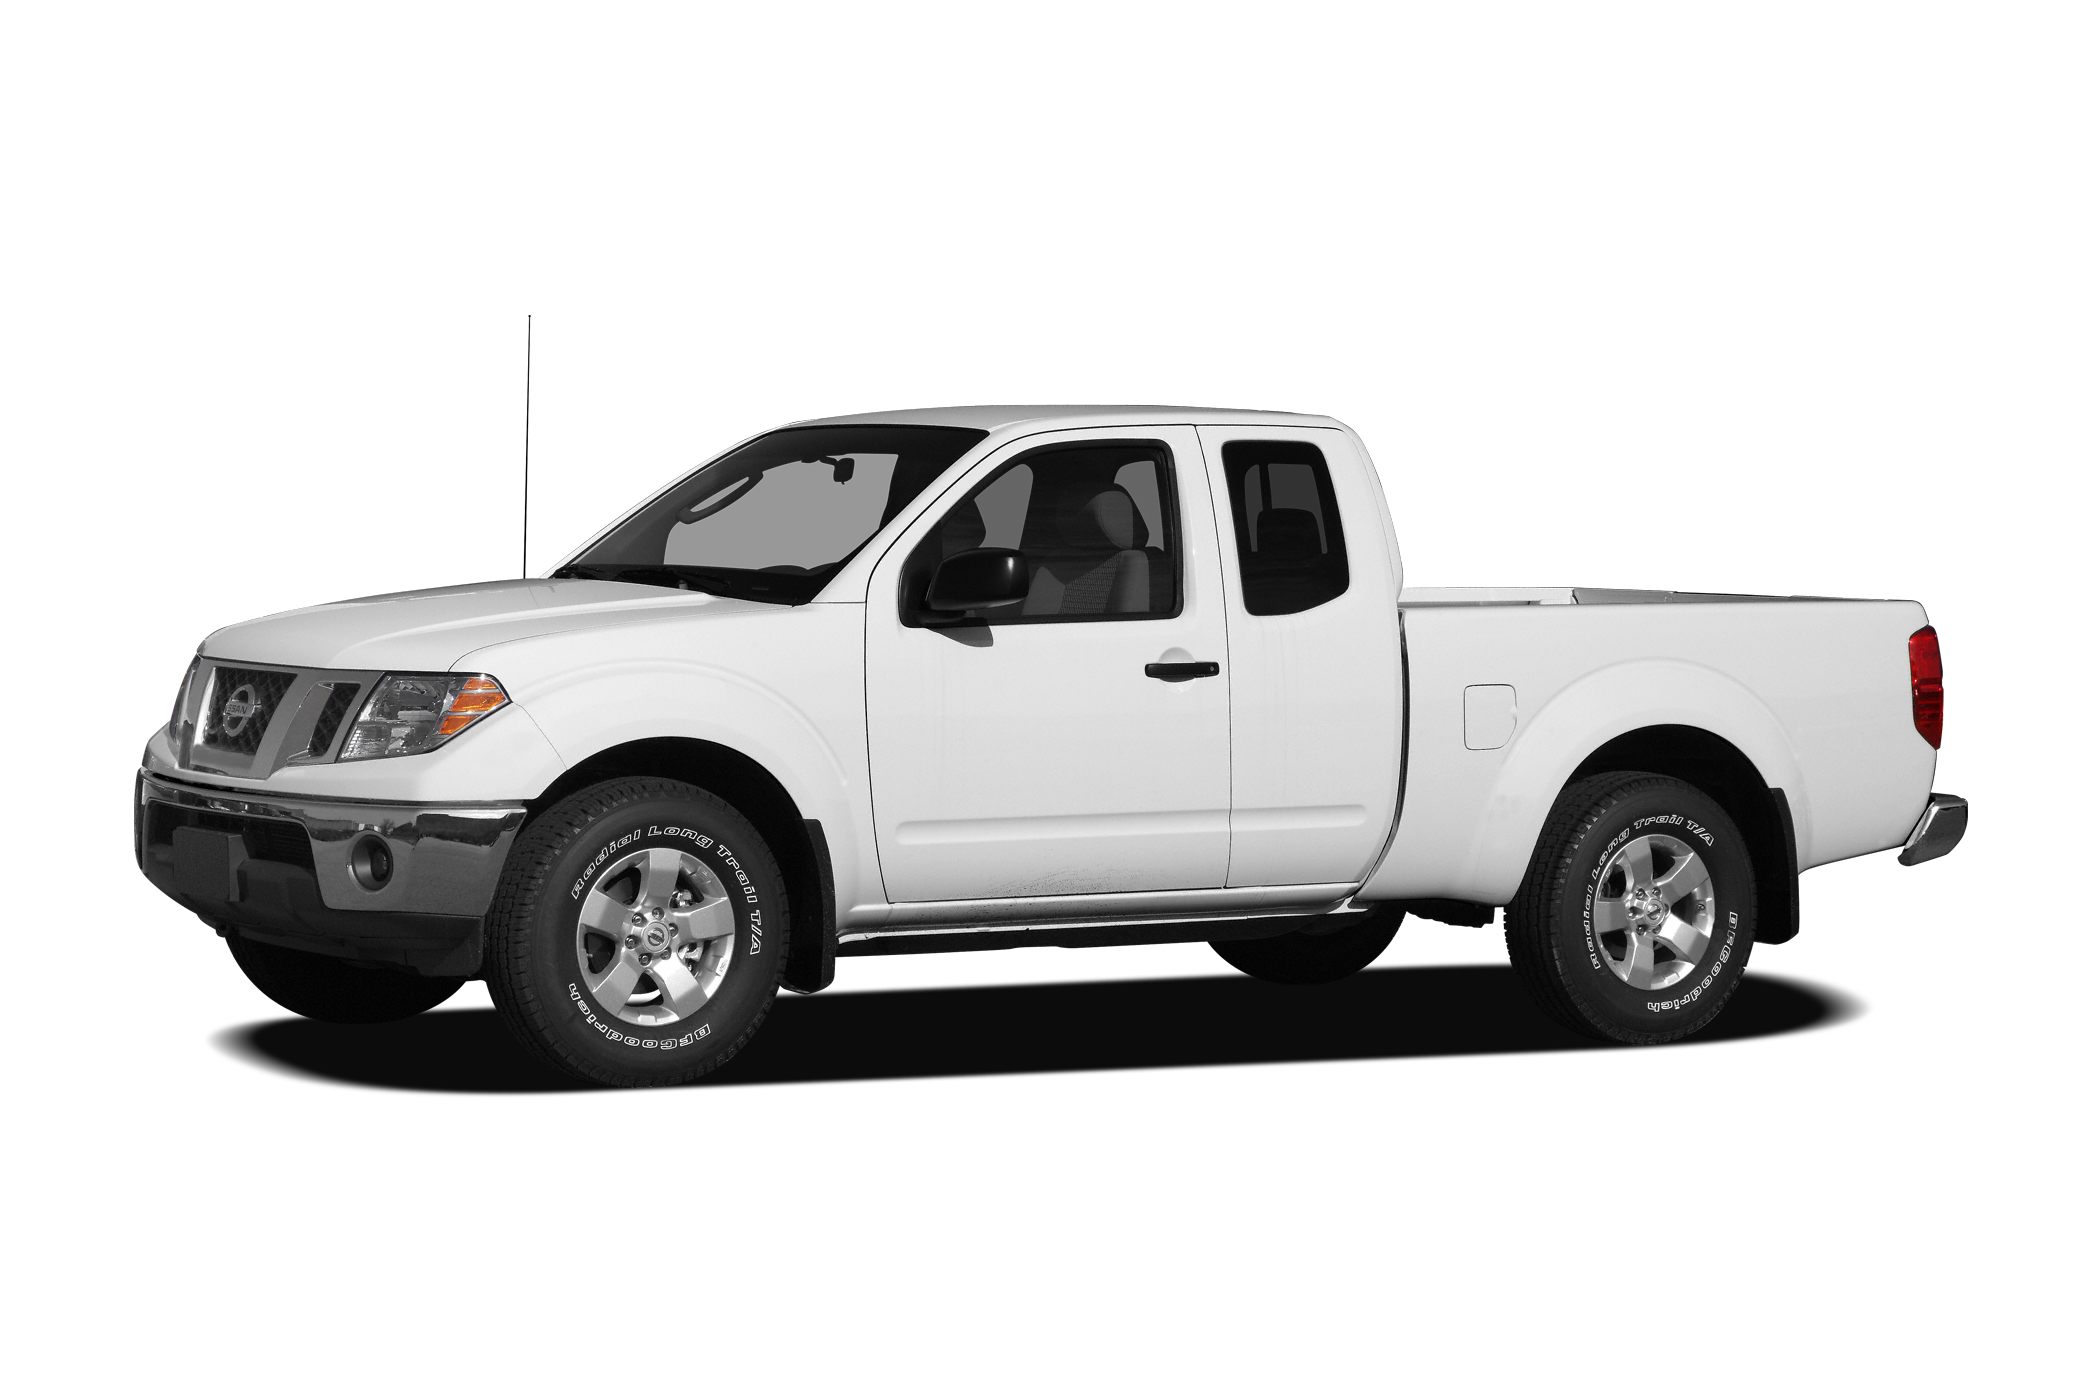 Nissan Frontier LE 4x2 King Cab 125.9 in. WB Pricing and Options